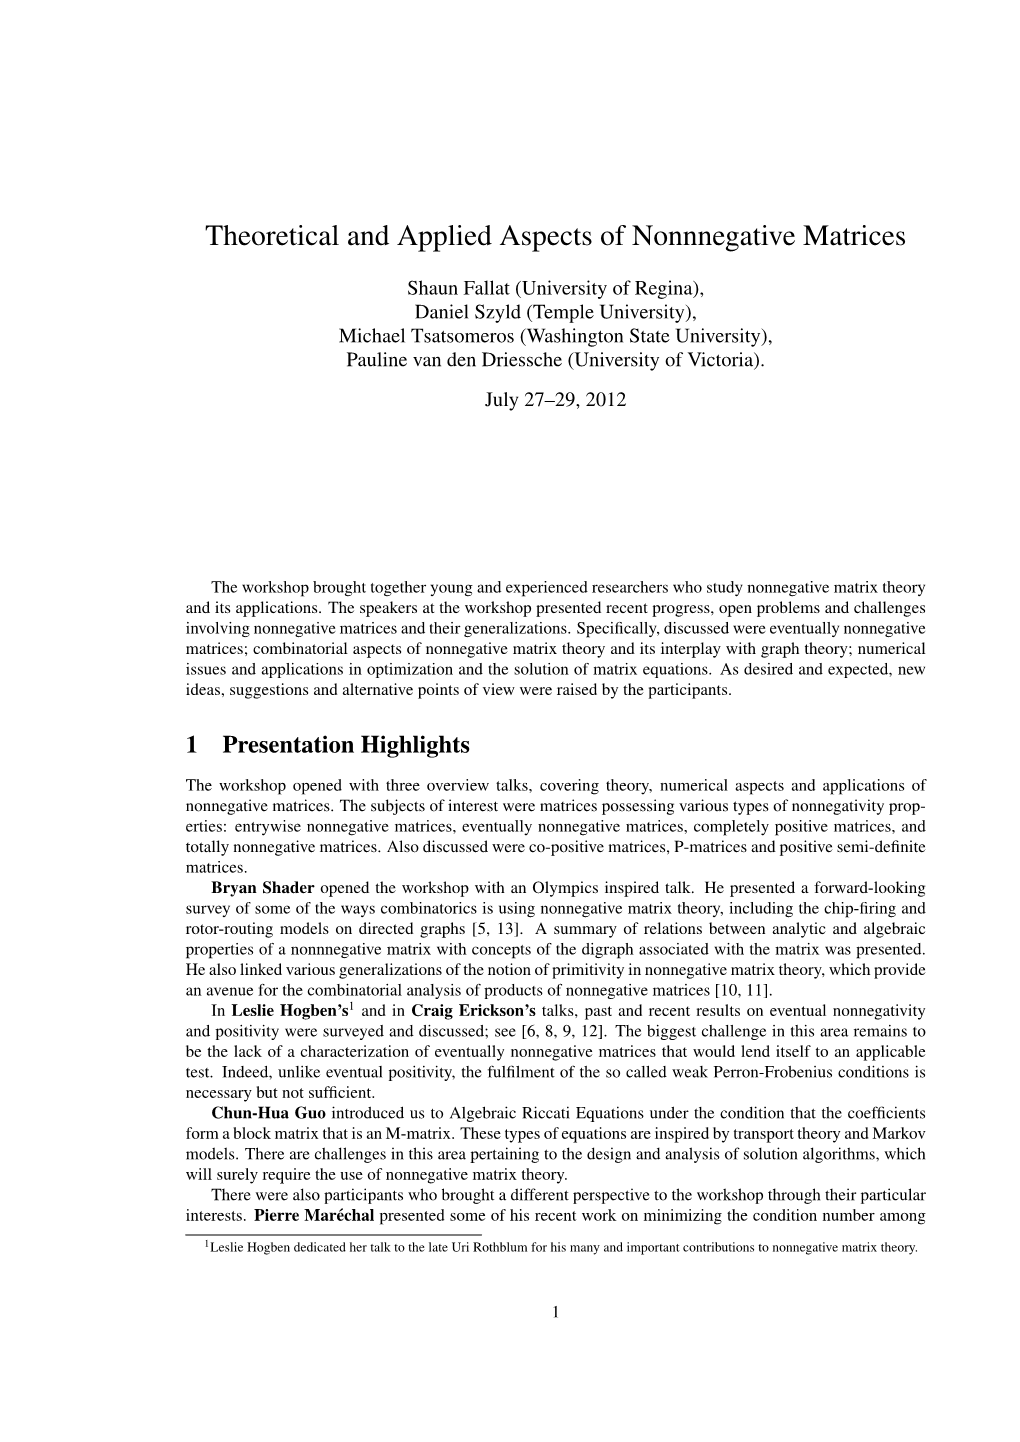 Theoretical and Applied Aspects of Nonnnegative Matrices